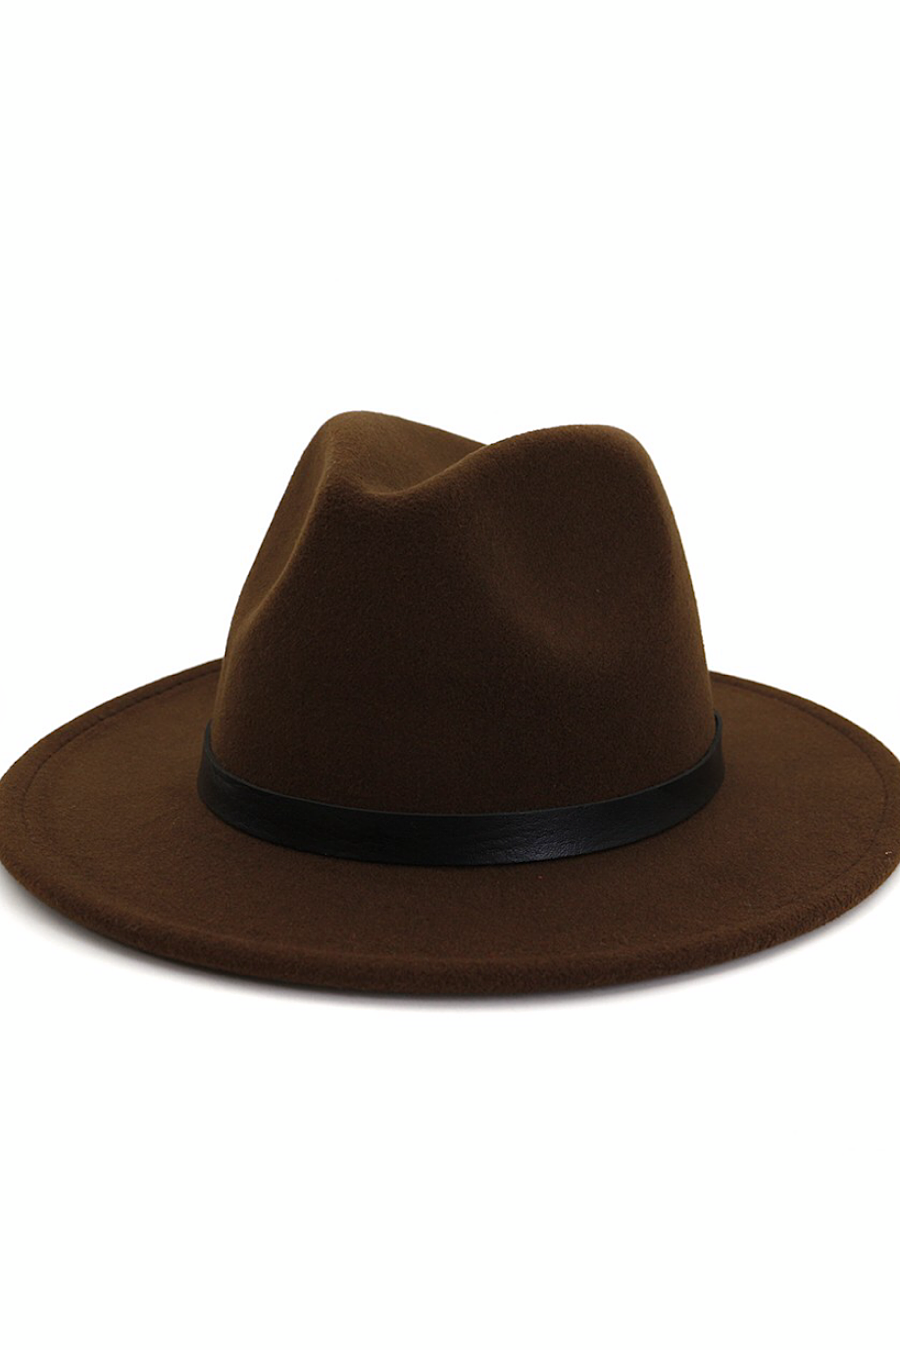 Fedora with Solid Black Band in Sev. Colors!